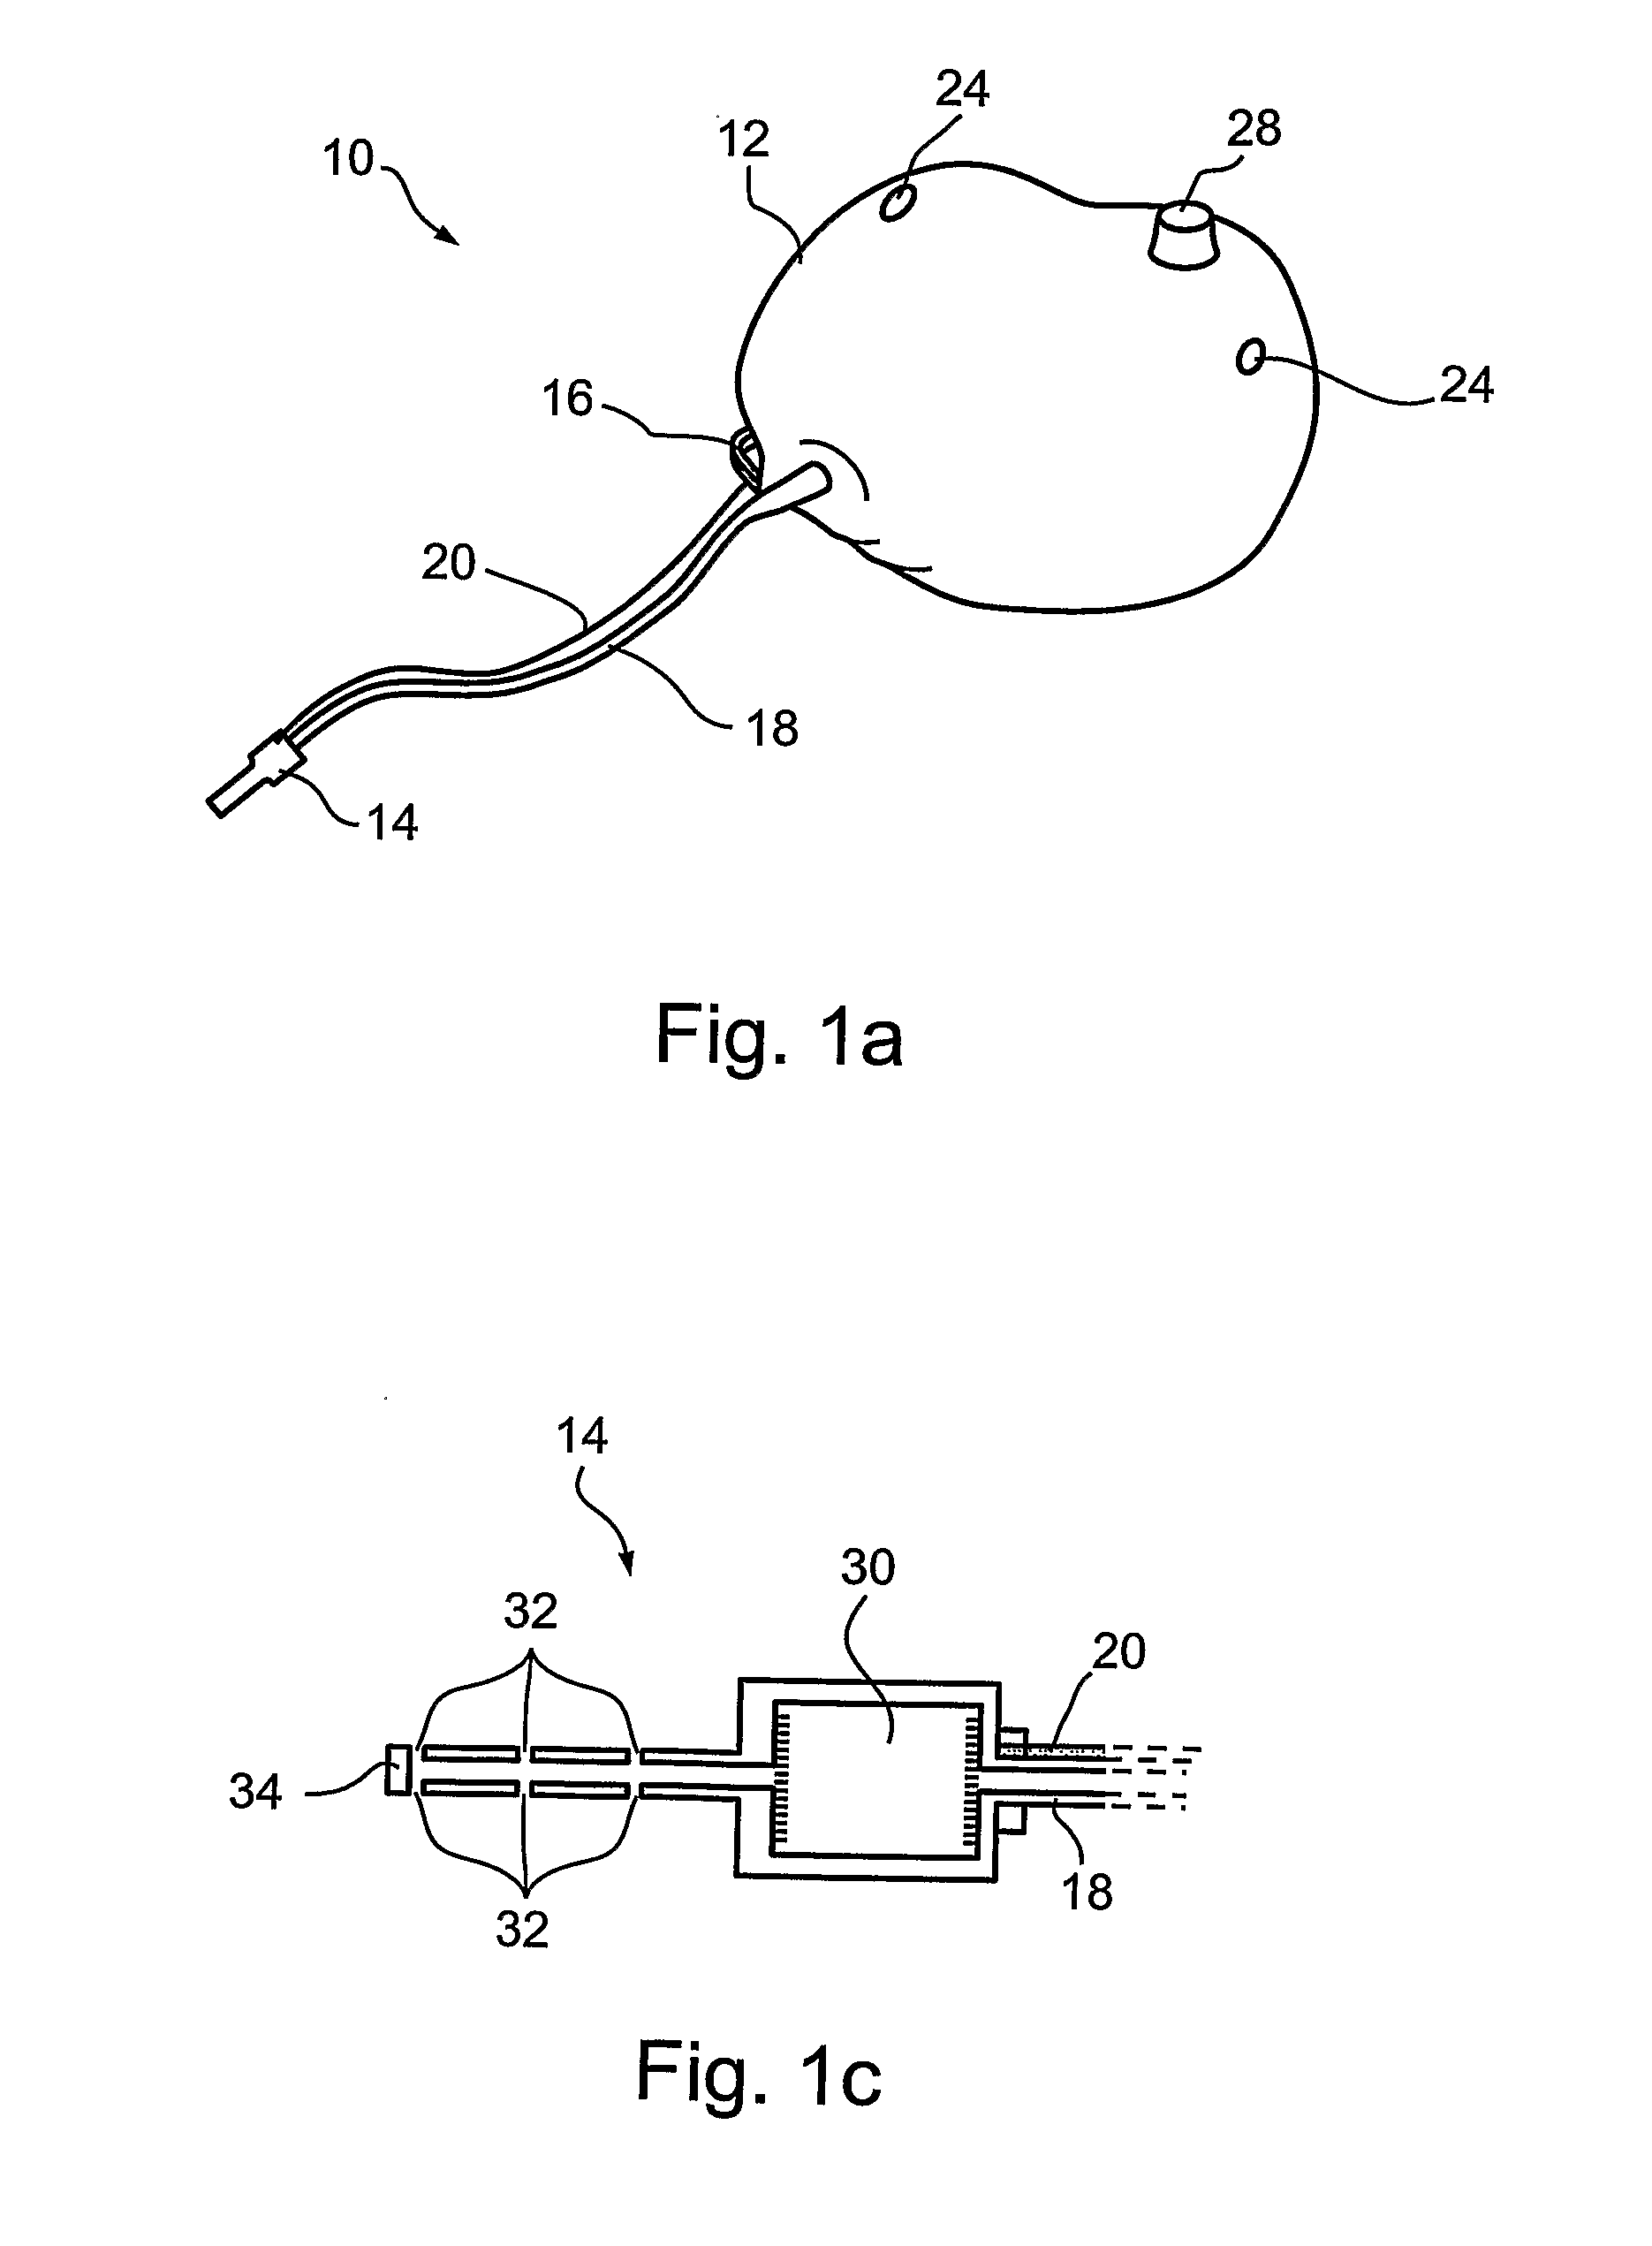 Spray administration of compositions including active agents such as peptides to the gastrointestinal tract